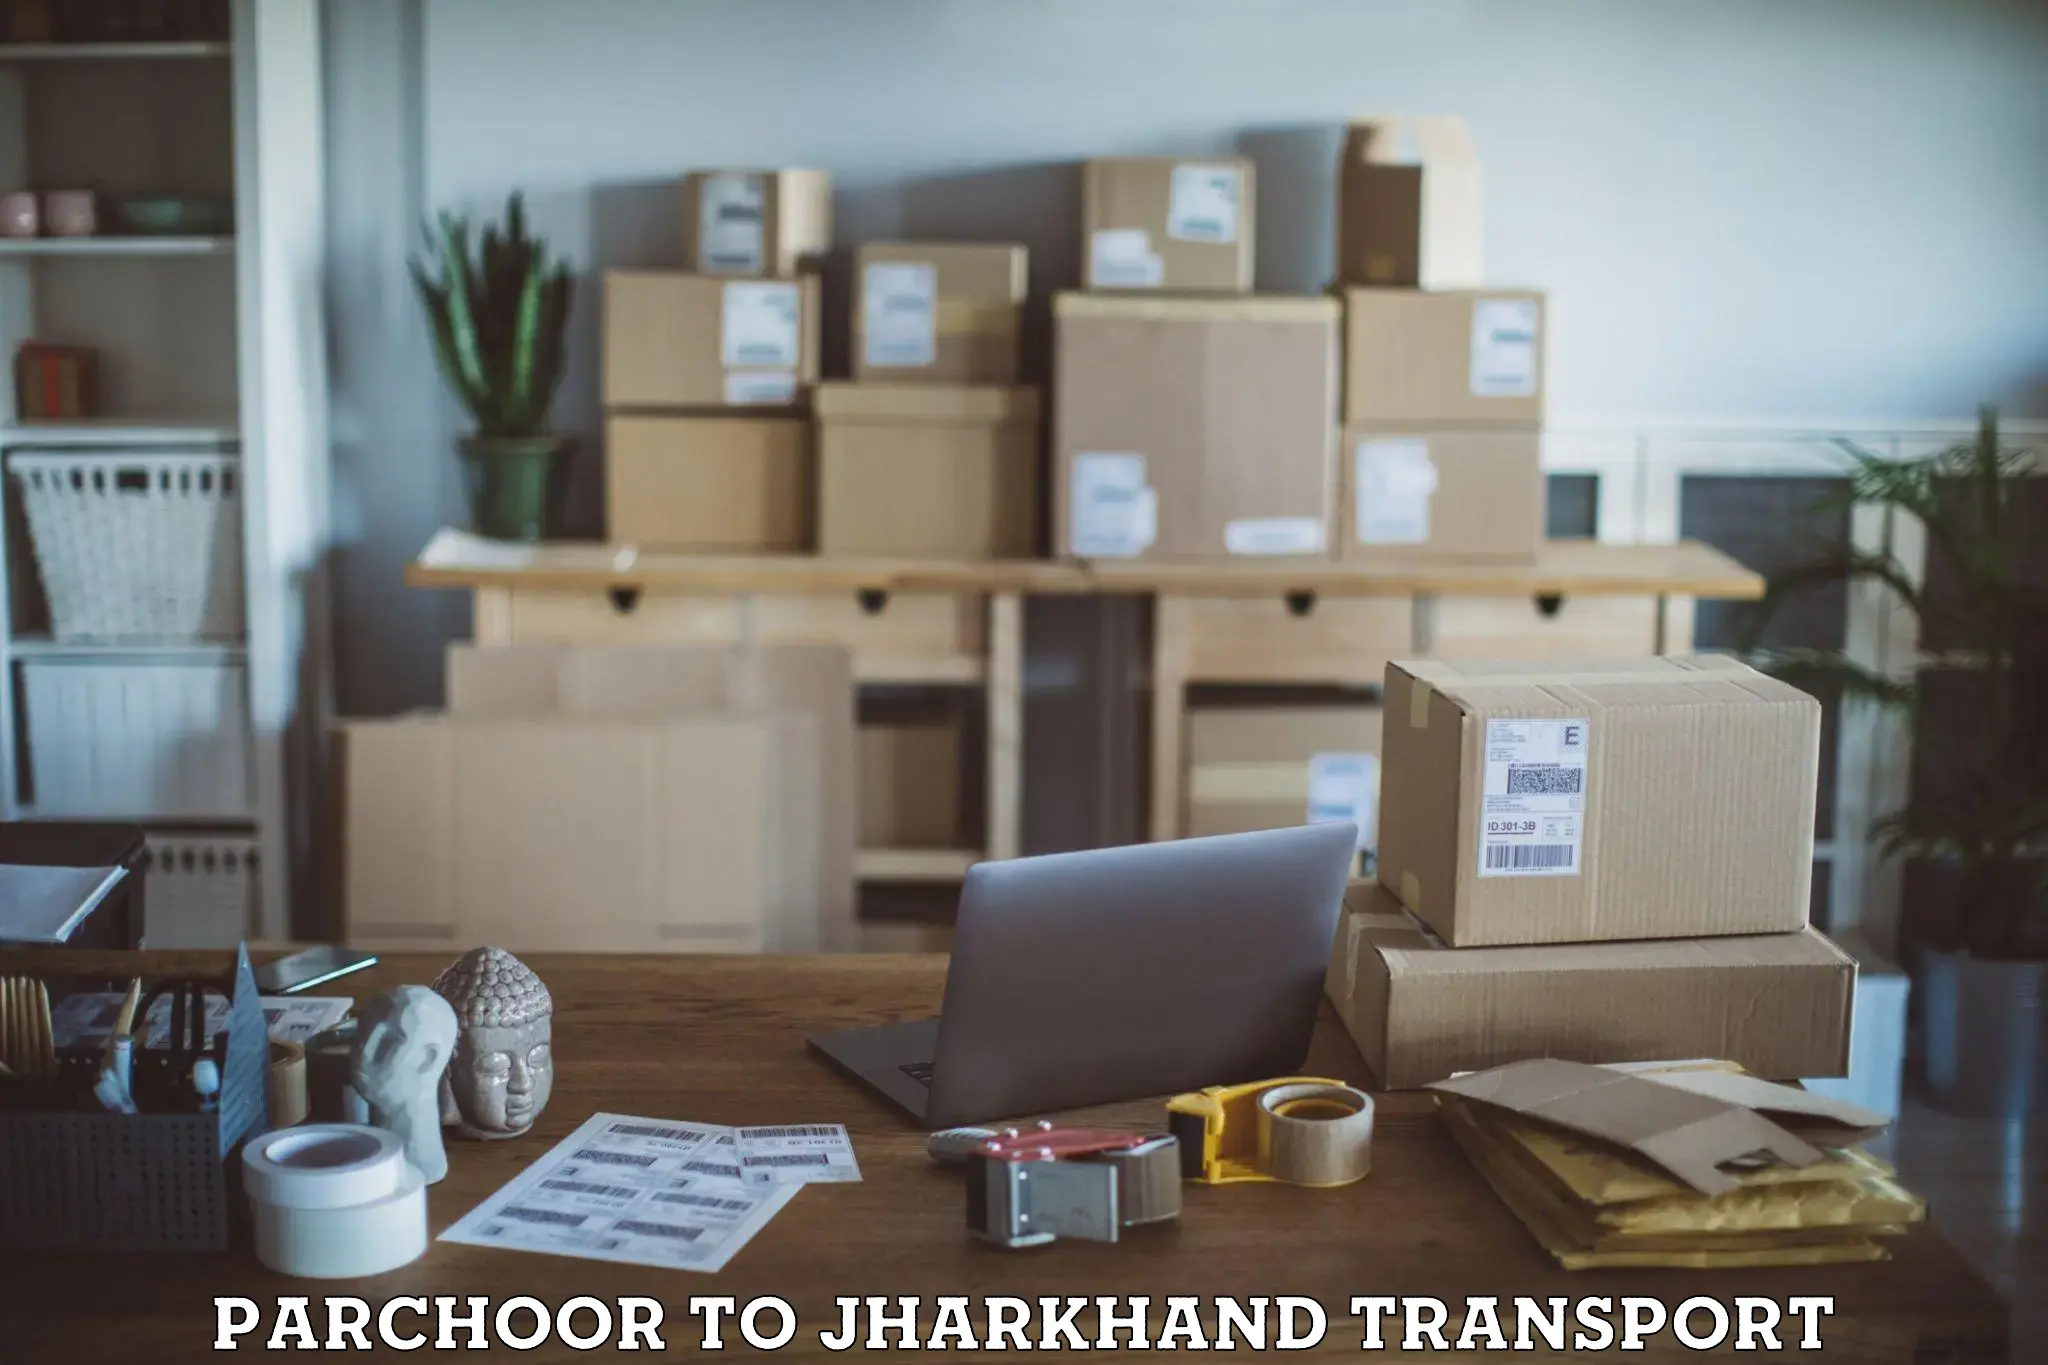 Container transport service Parchoor to Mahagama